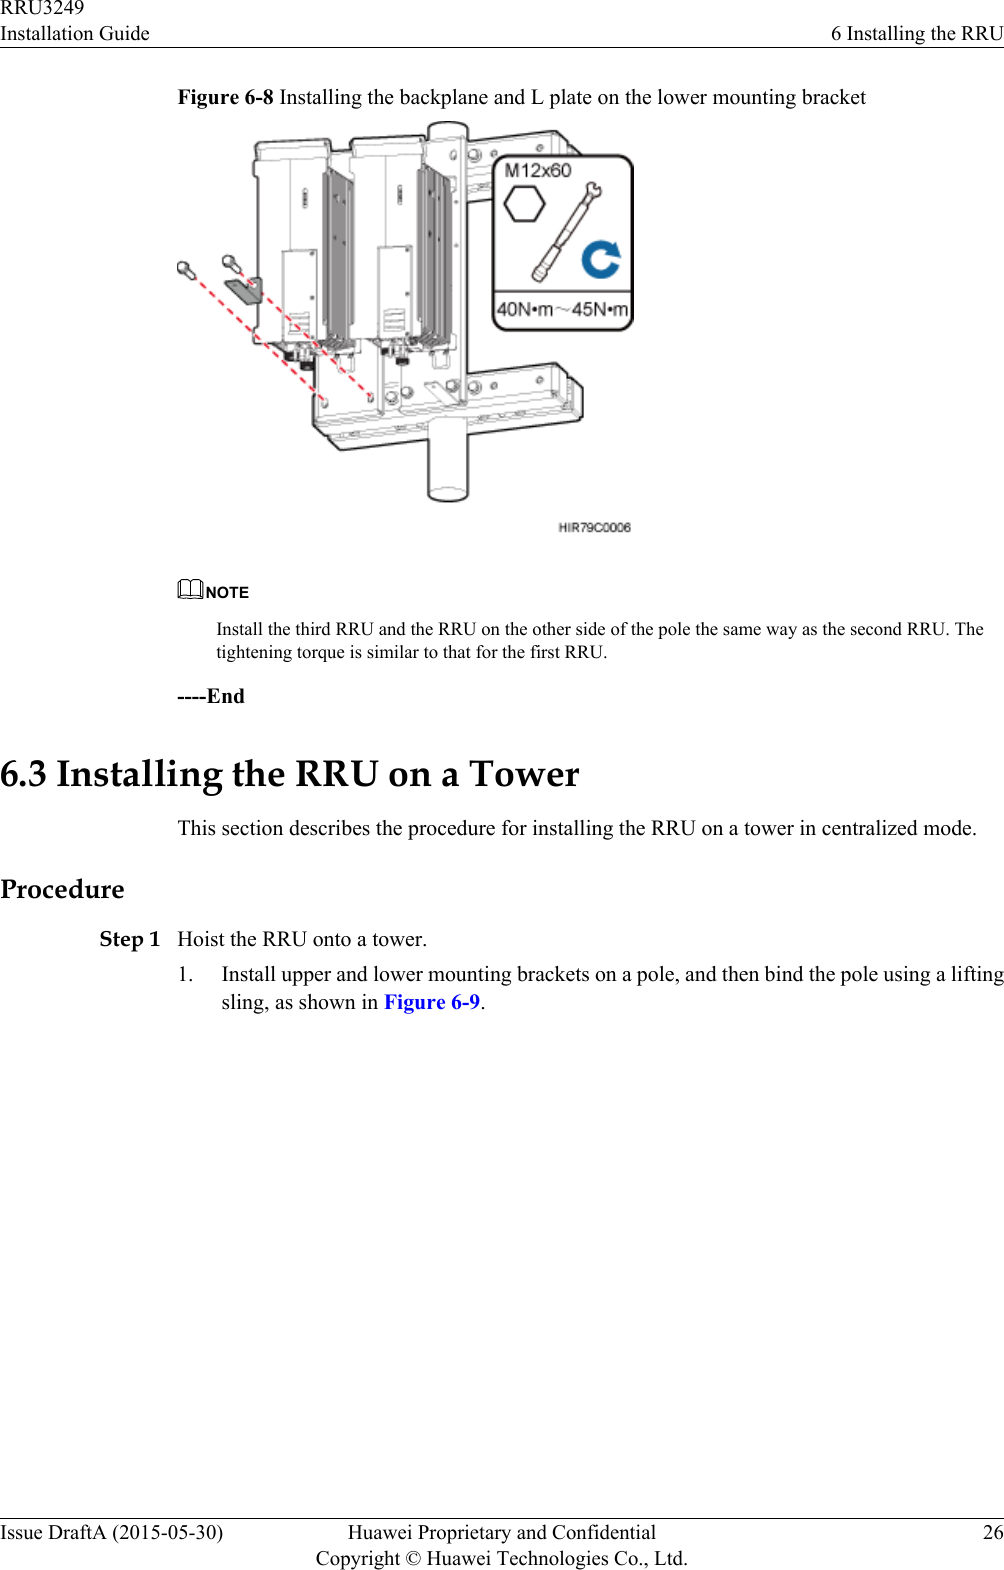 Figure 6-8 Installing the backplane and L plate on the lower mounting bracketNOTEInstall the third RRU and the RRU on the other side of the pole the same way as the second RRU. Thetightening torque is similar to that for the first RRU.----End6.3 Installing the RRU on a TowerThis section describes the procedure for installing the RRU on a tower in centralized mode.ProcedureStep 1 Hoist the RRU onto a tower.1. Install upper and lower mounting brackets on a pole, and then bind the pole using a liftingsling, as shown in Figure 6-9.RRU3249Installation Guide 6 Installing the RRUIssue DraftA (2015-05-30) Huawei Proprietary and ConfidentialCopyright © Huawei Technologies Co., Ltd.26